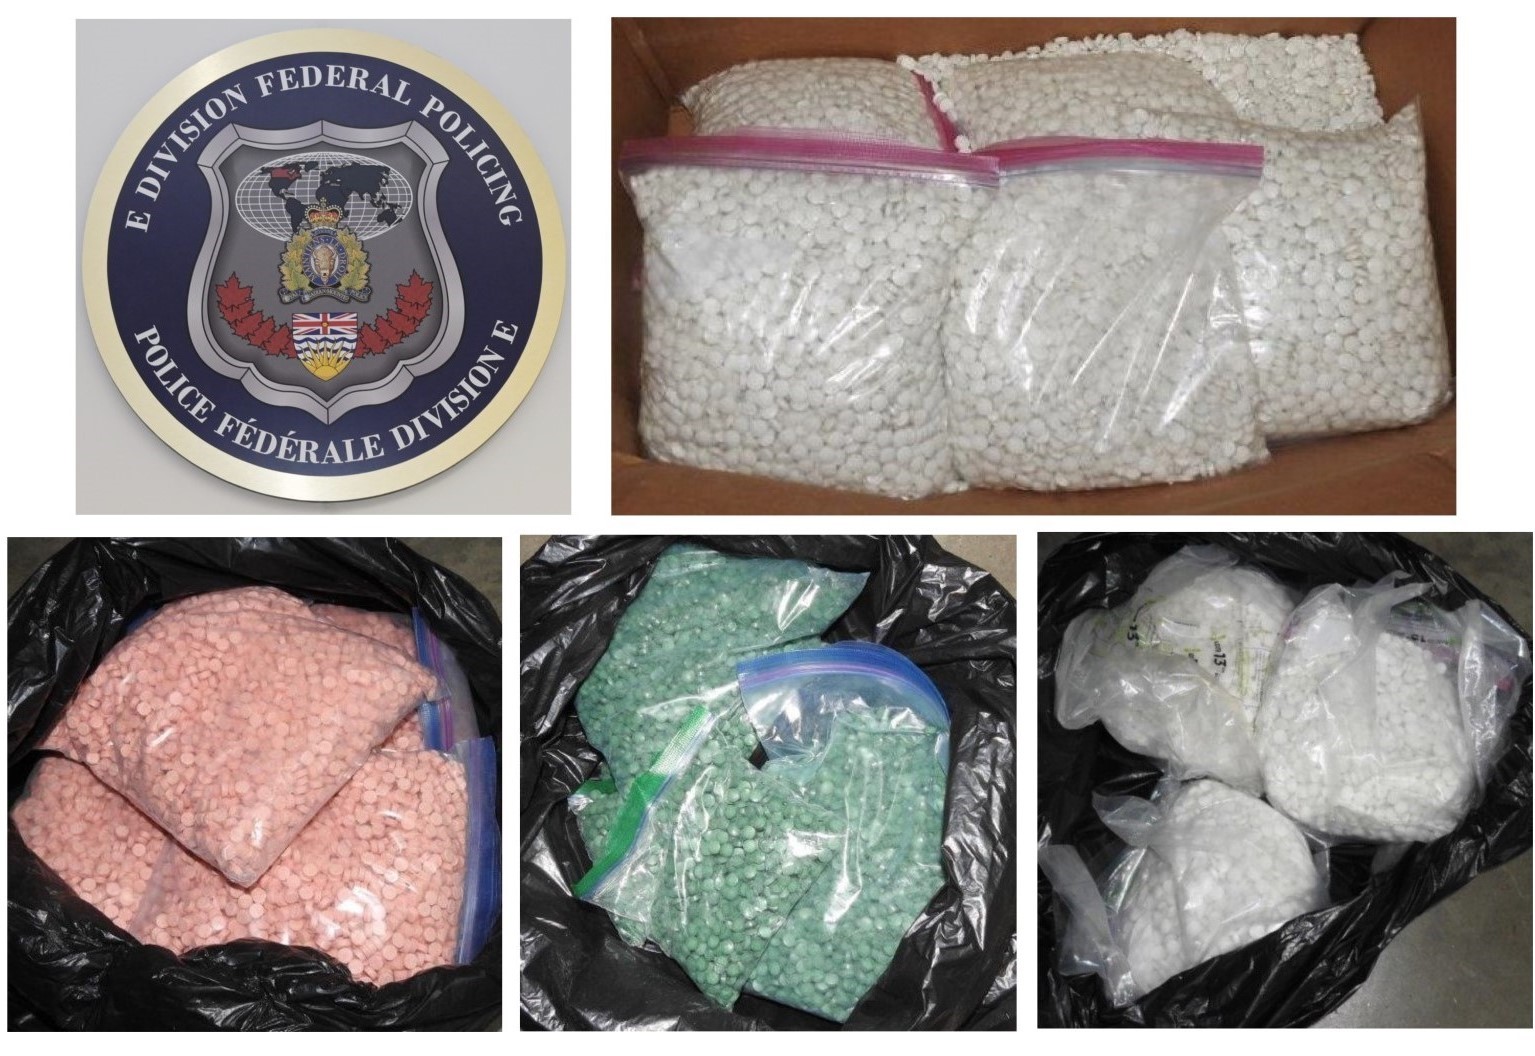 Collage of 4 photos, top two photos from left to right, round RCMP FSOC emblem, 5 large zip bags of white pills. Bottom three photos from left to right, 4 large zip bags of pink pills, 5 large zip bags of green pills, 5 plastic bags of white pills. All pills are believed to be illicit drugs.